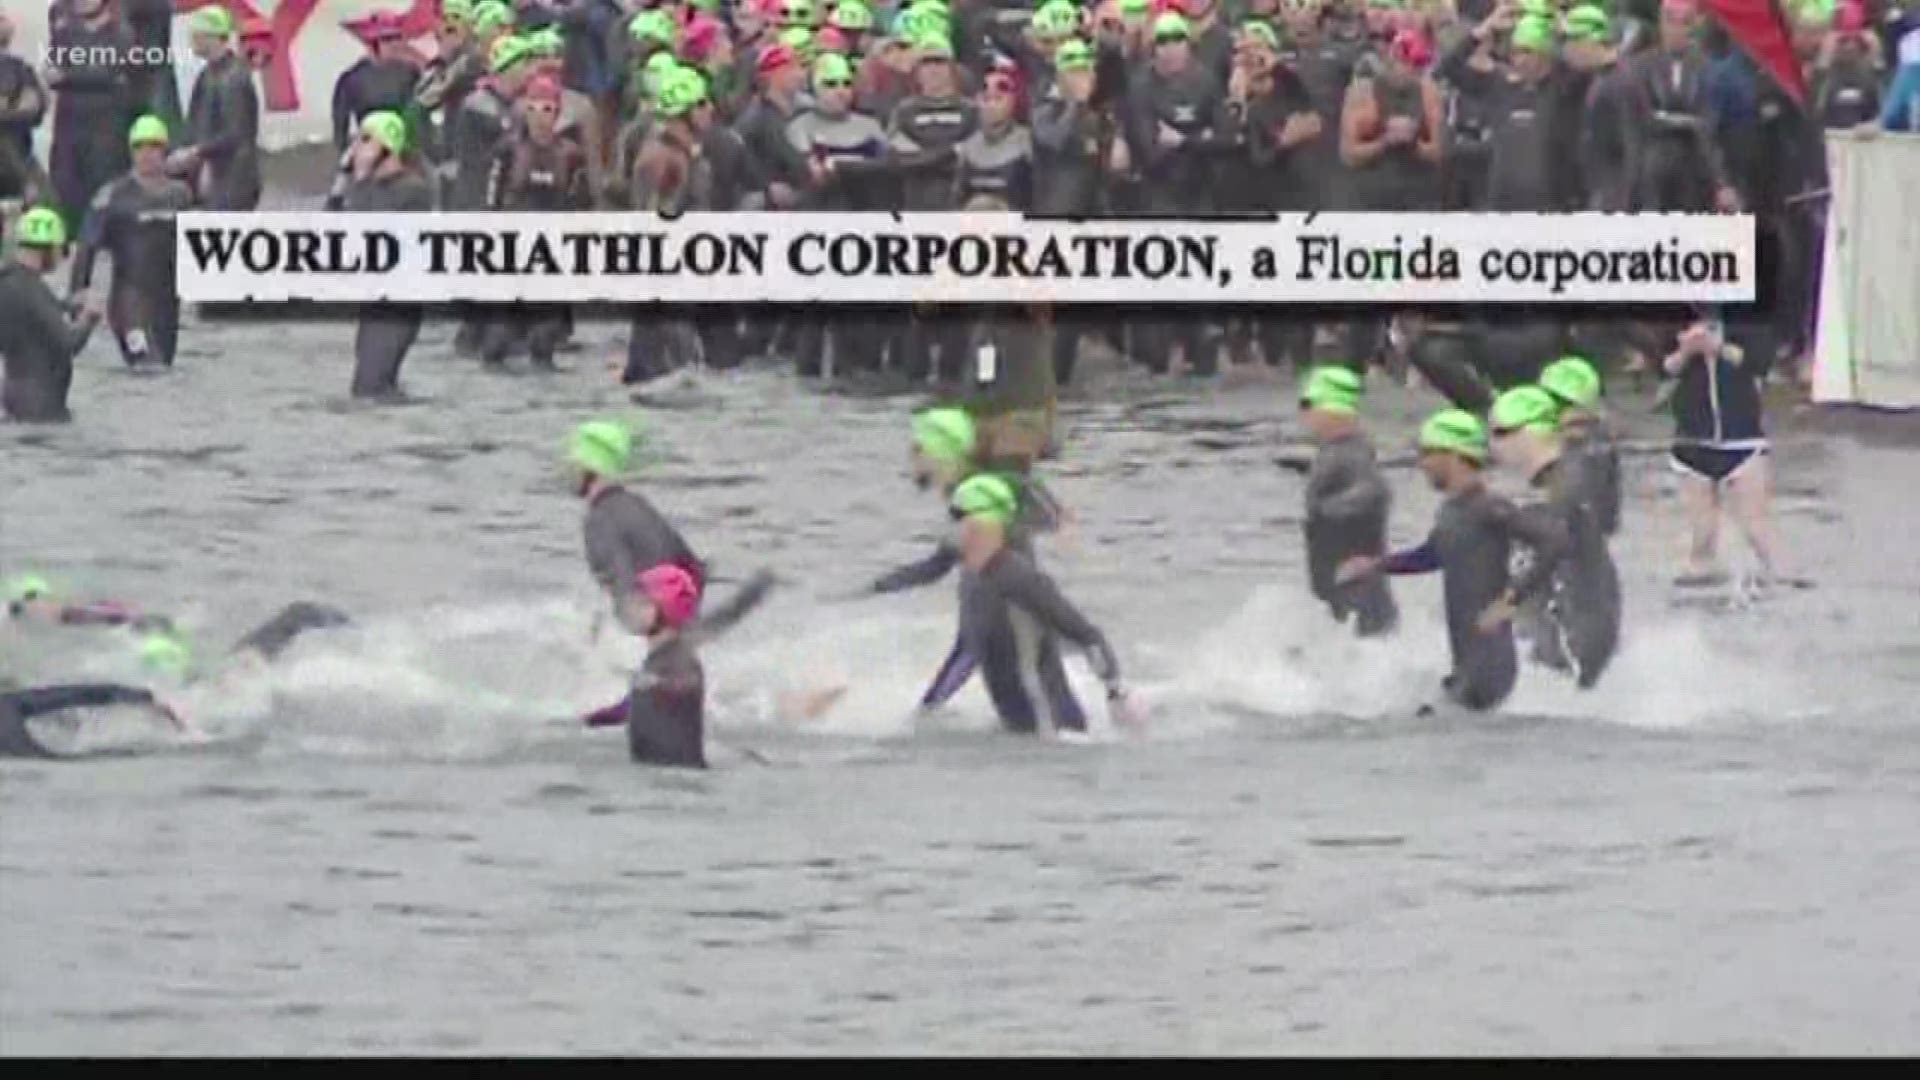 The city of Coeur d'Alene and organizers of the Ironman triathlon are working to bring the race back to the city in 2021.